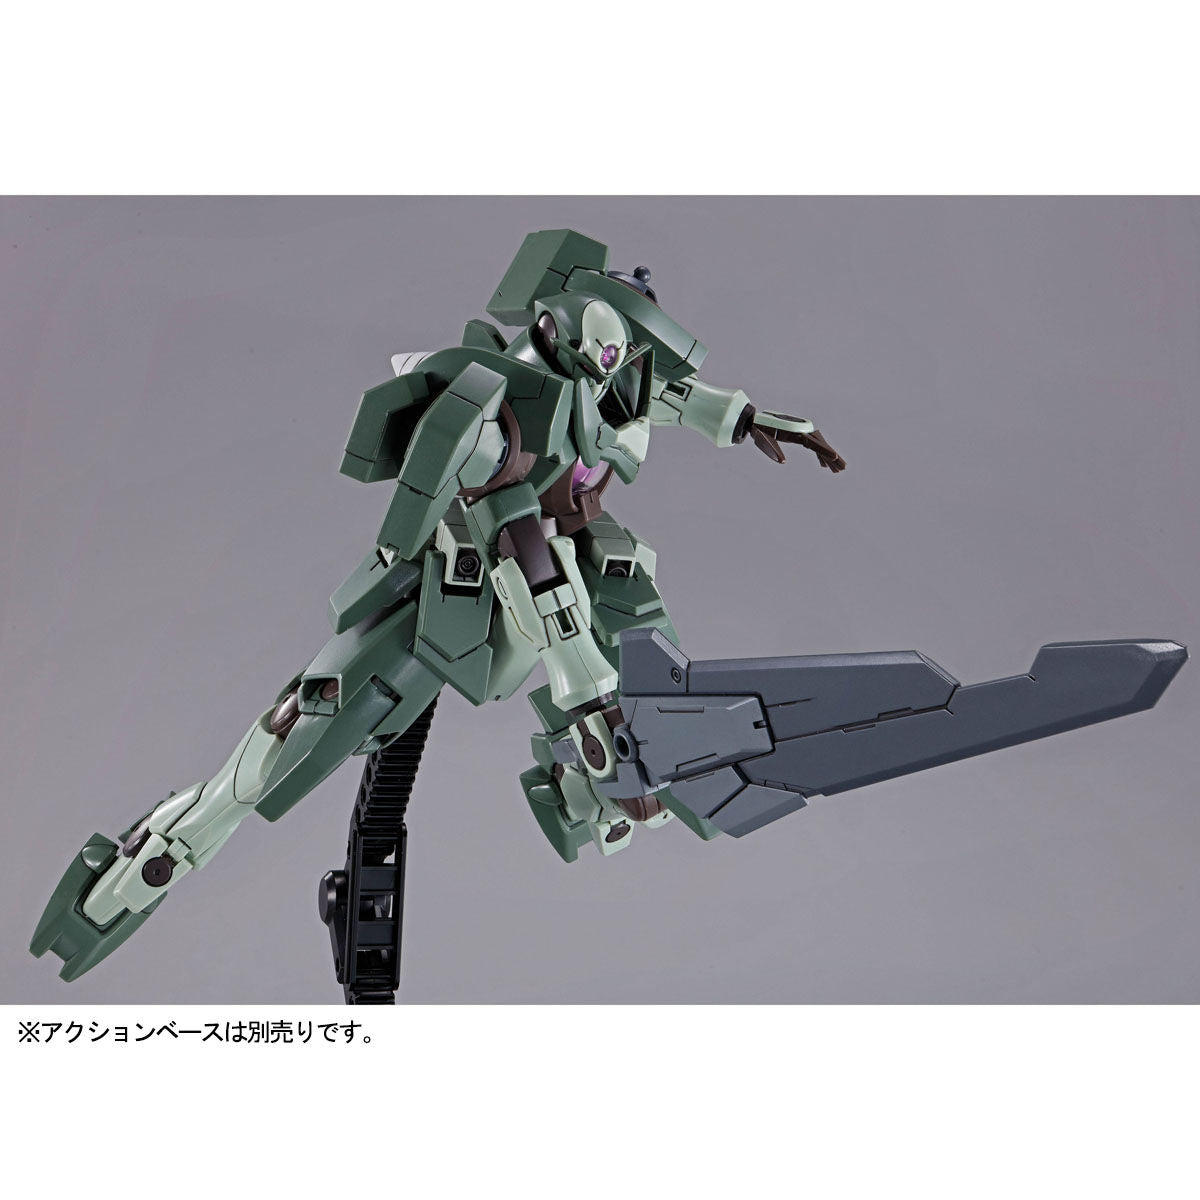 P-BANDAI: HG 1/144 GN-X IV MASS PRODUCTION TYPE [End of February 2020]